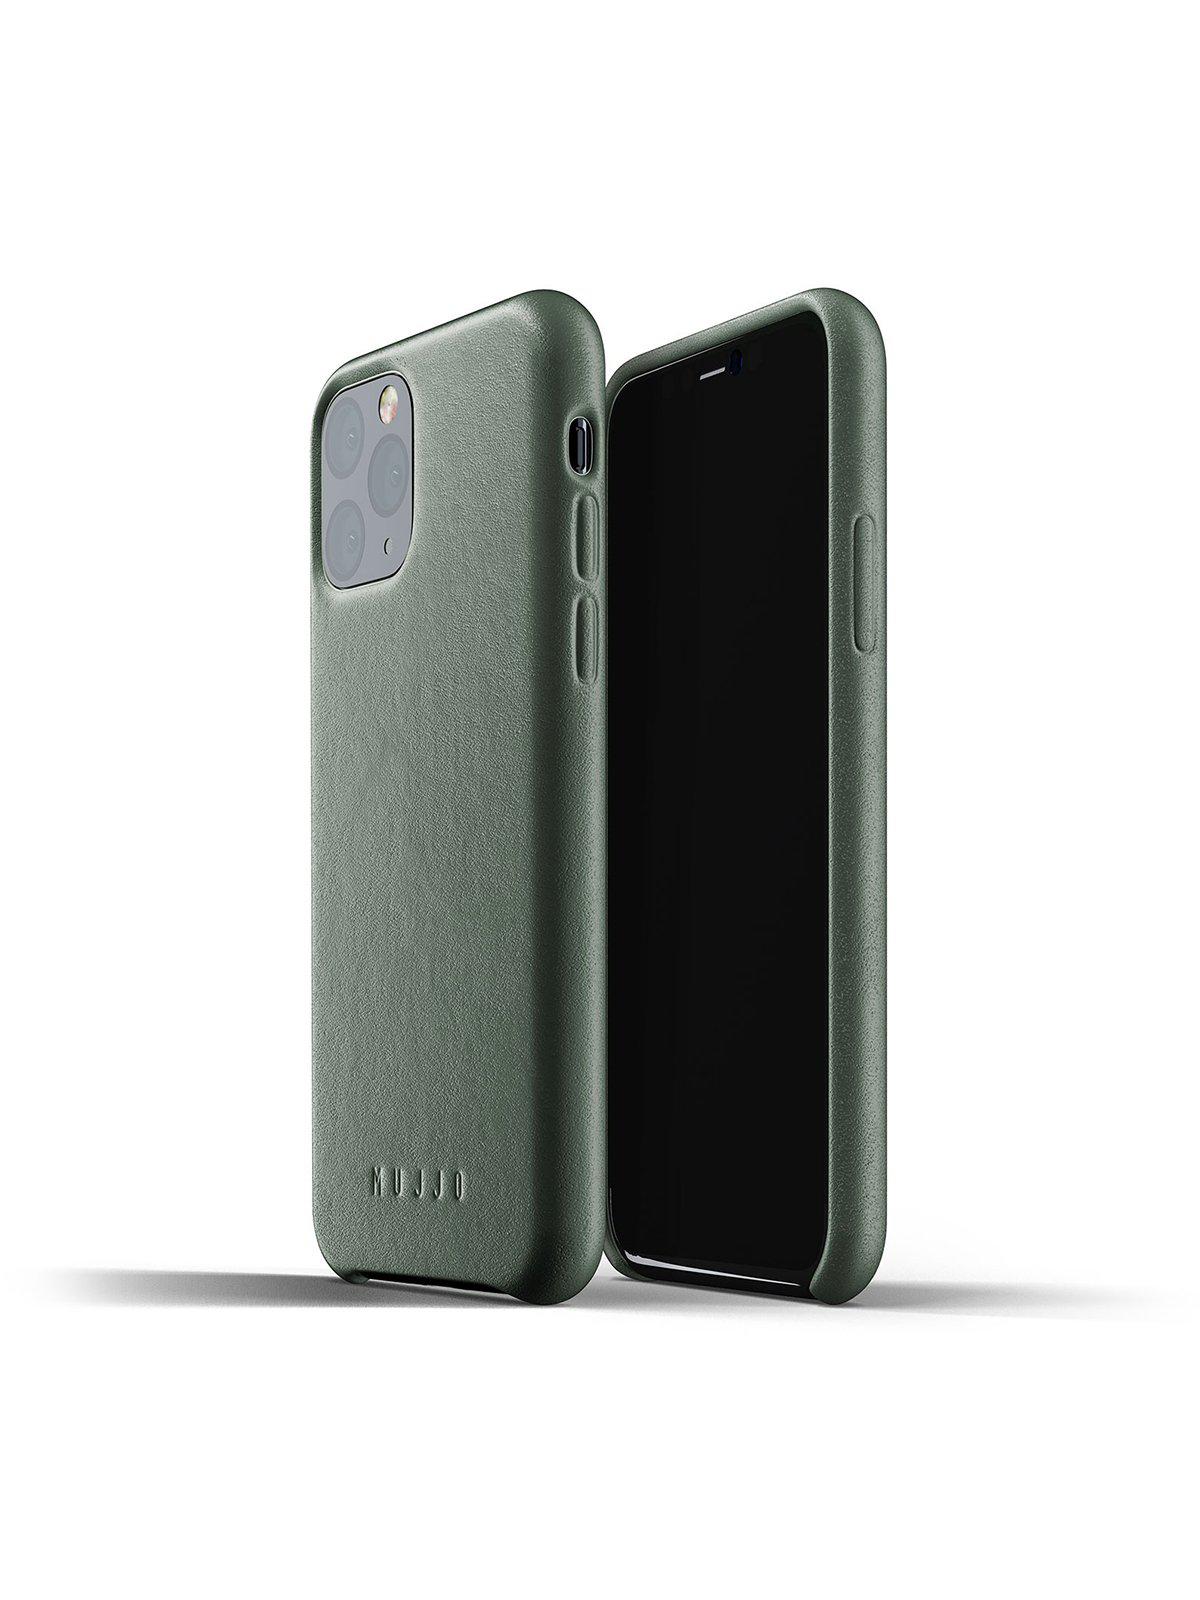 Mujjo Full Leather Case for iPhone 11 Pro Slate Green - MORE by Morello Indonesia